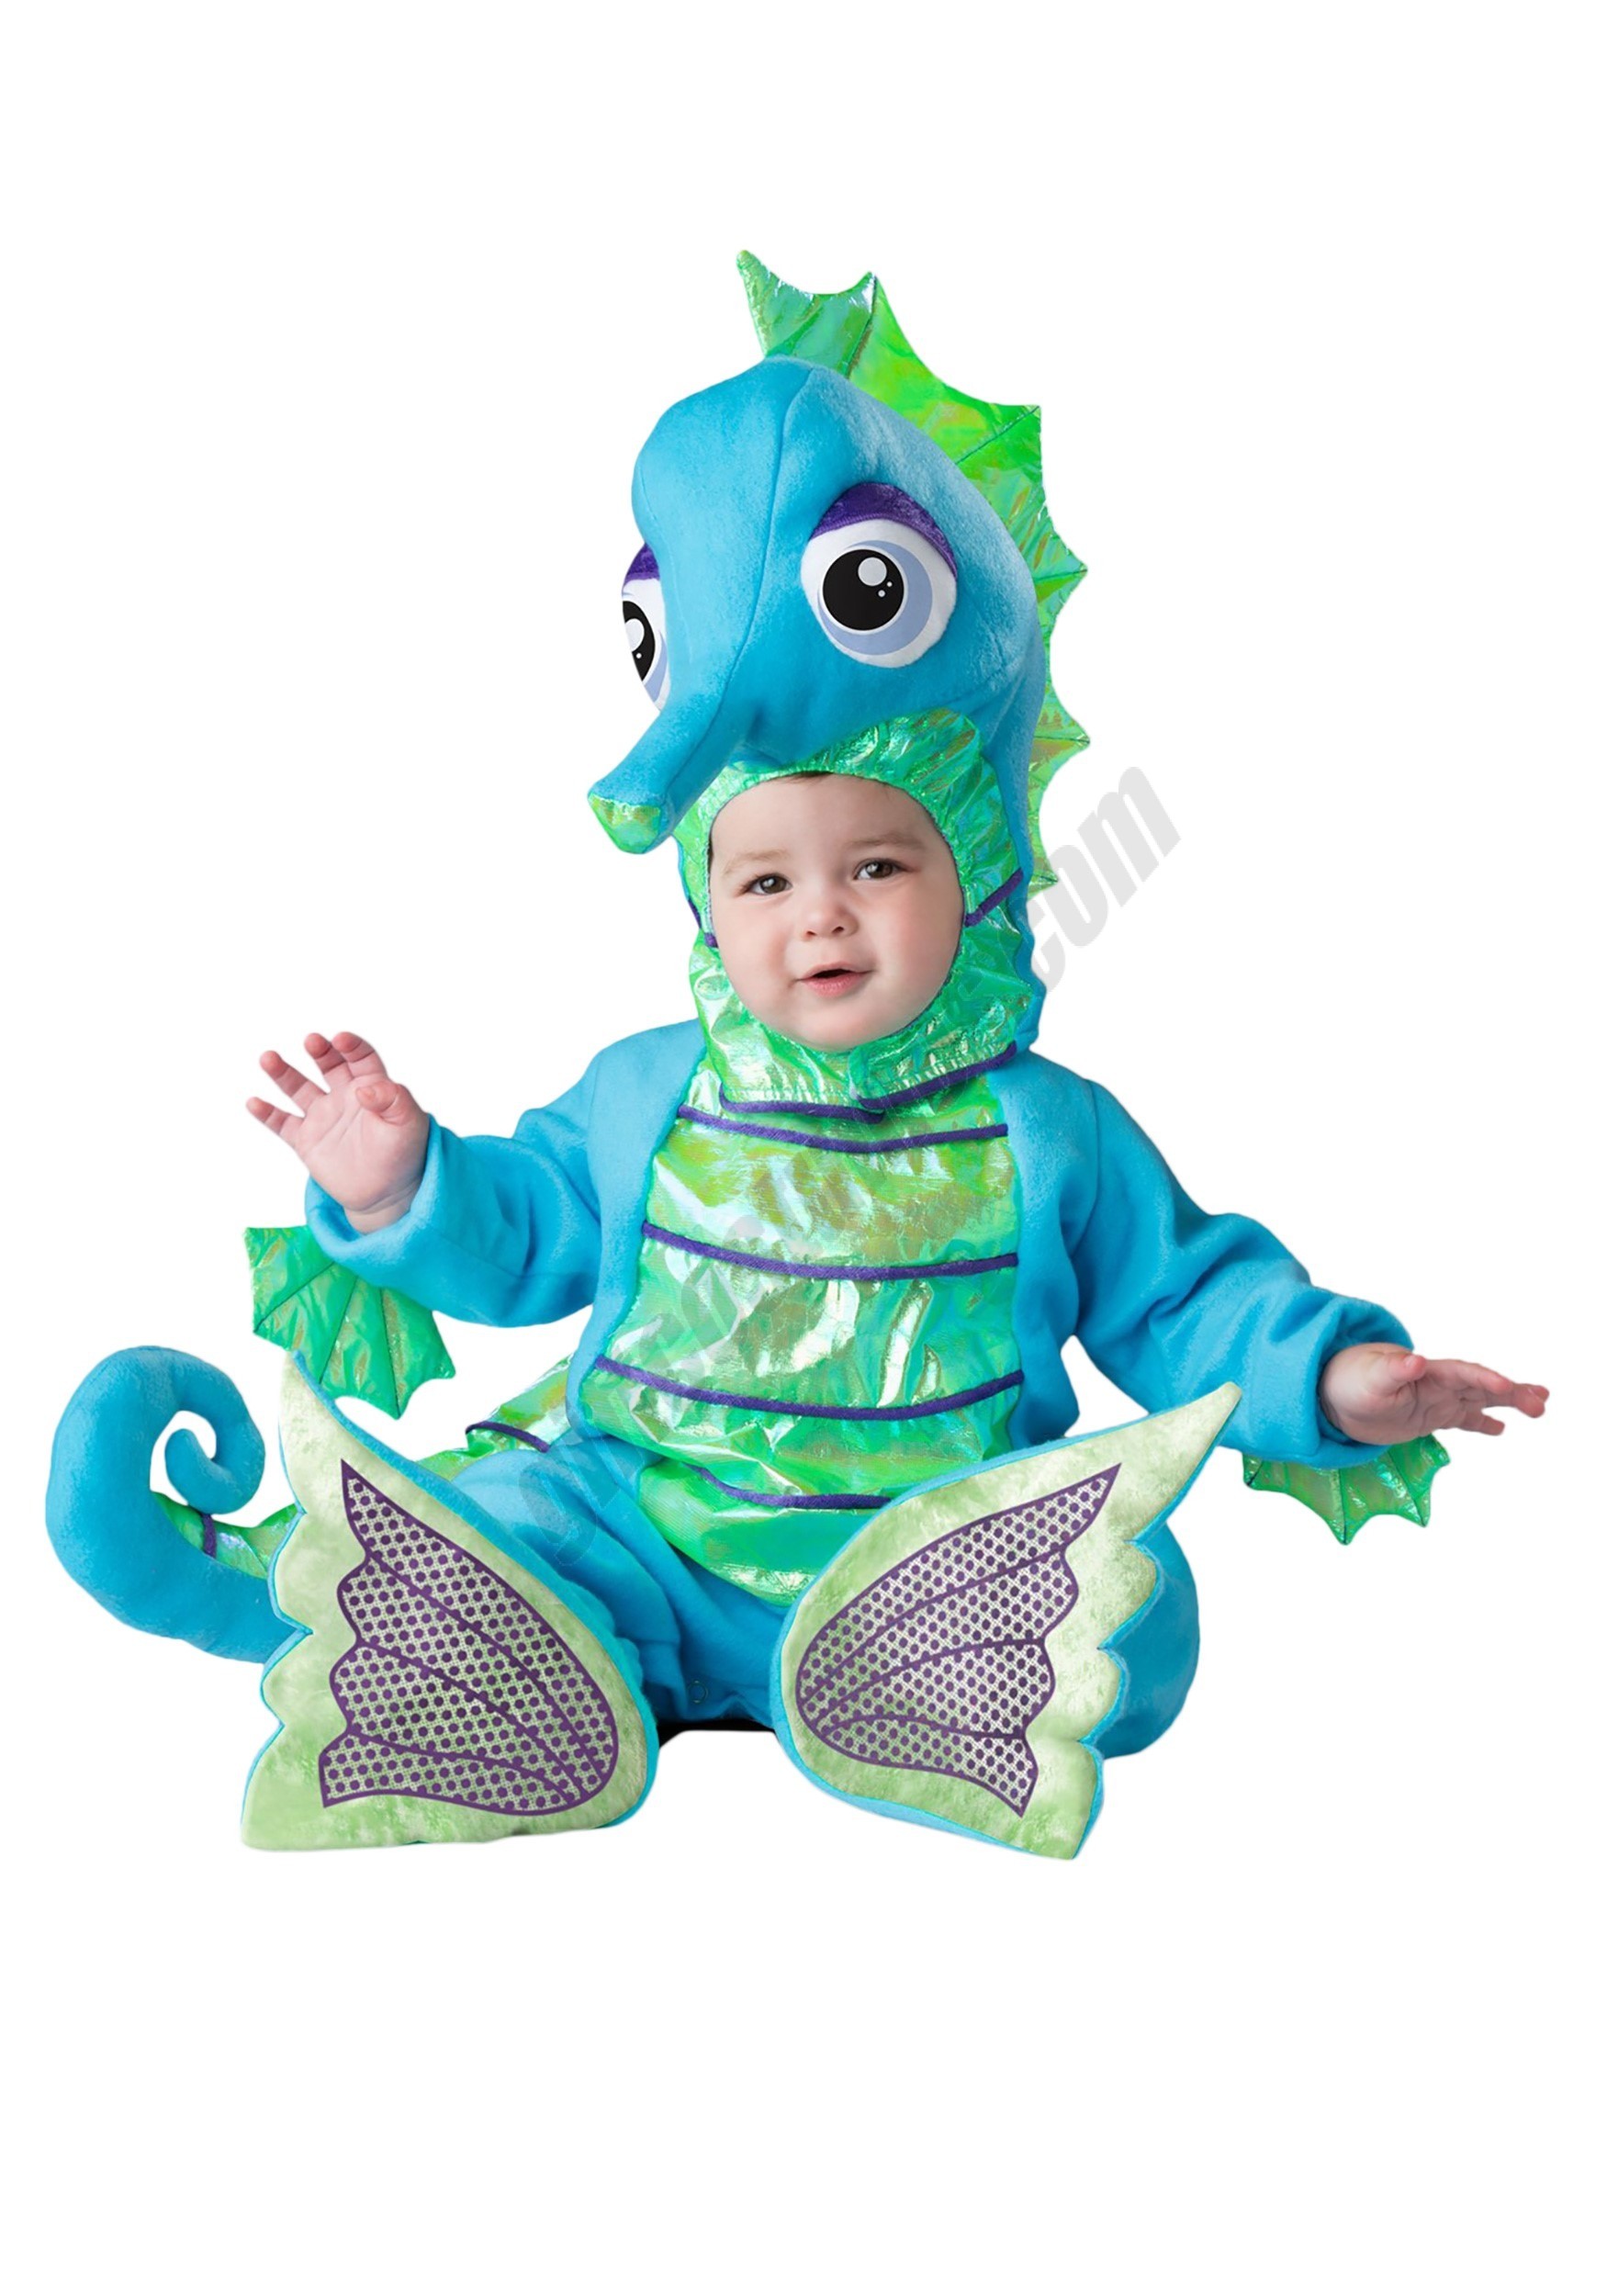 Baby Silly Seahorse Costume Promotions - Baby Silly Seahorse Costume Promotions